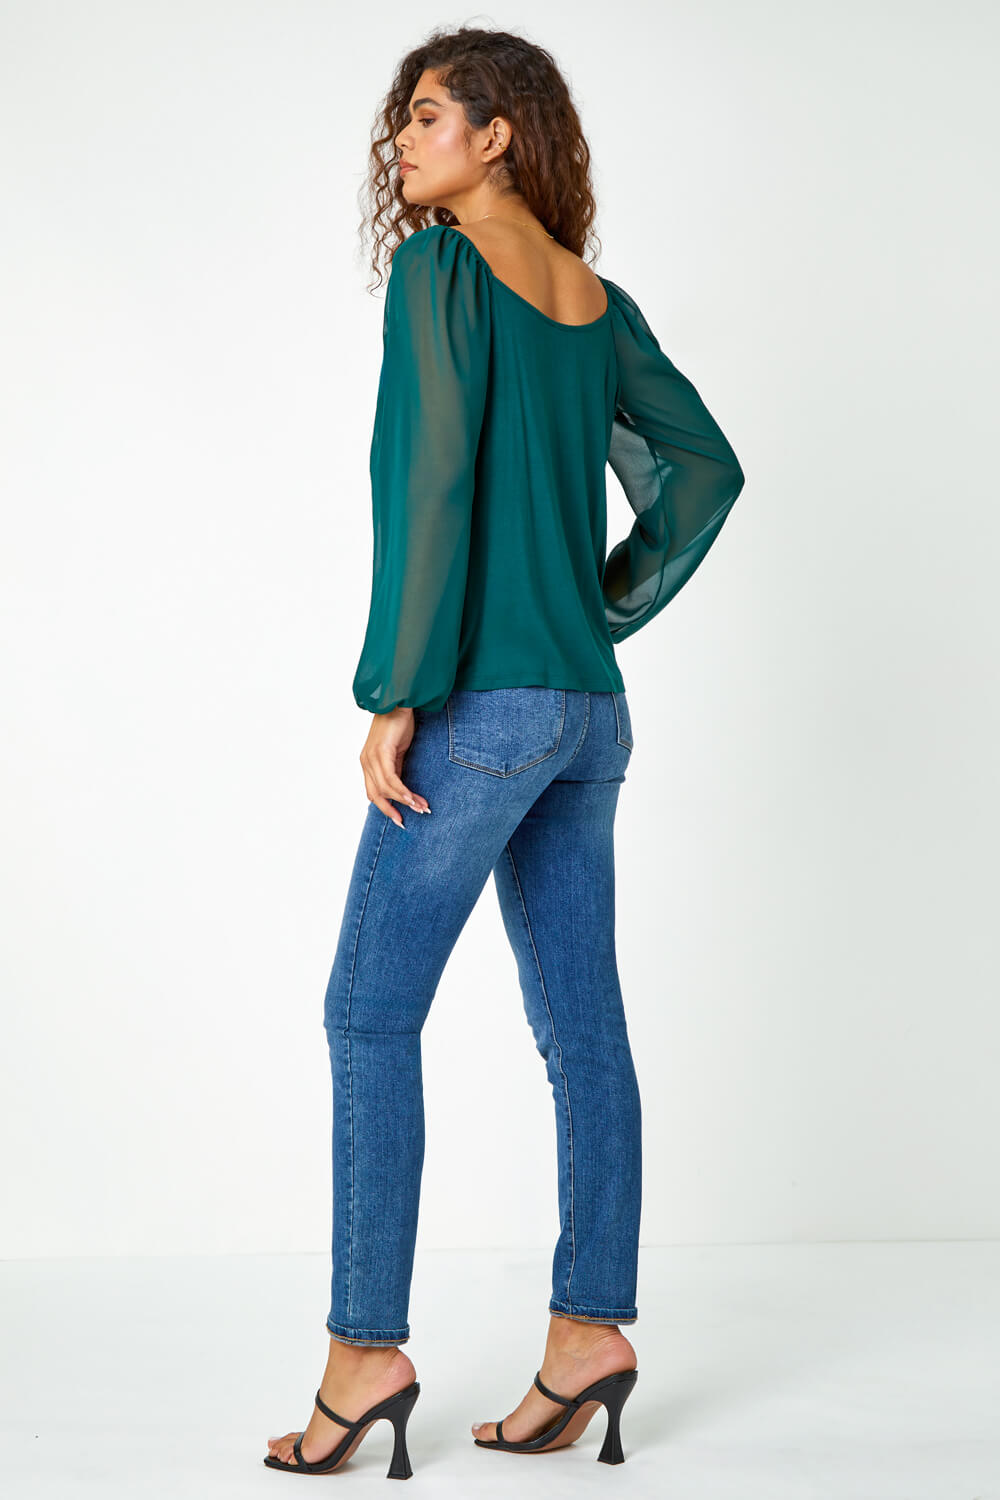 Green Contrast Chiffon Sleeve Stretch Top, Image 3 of 5